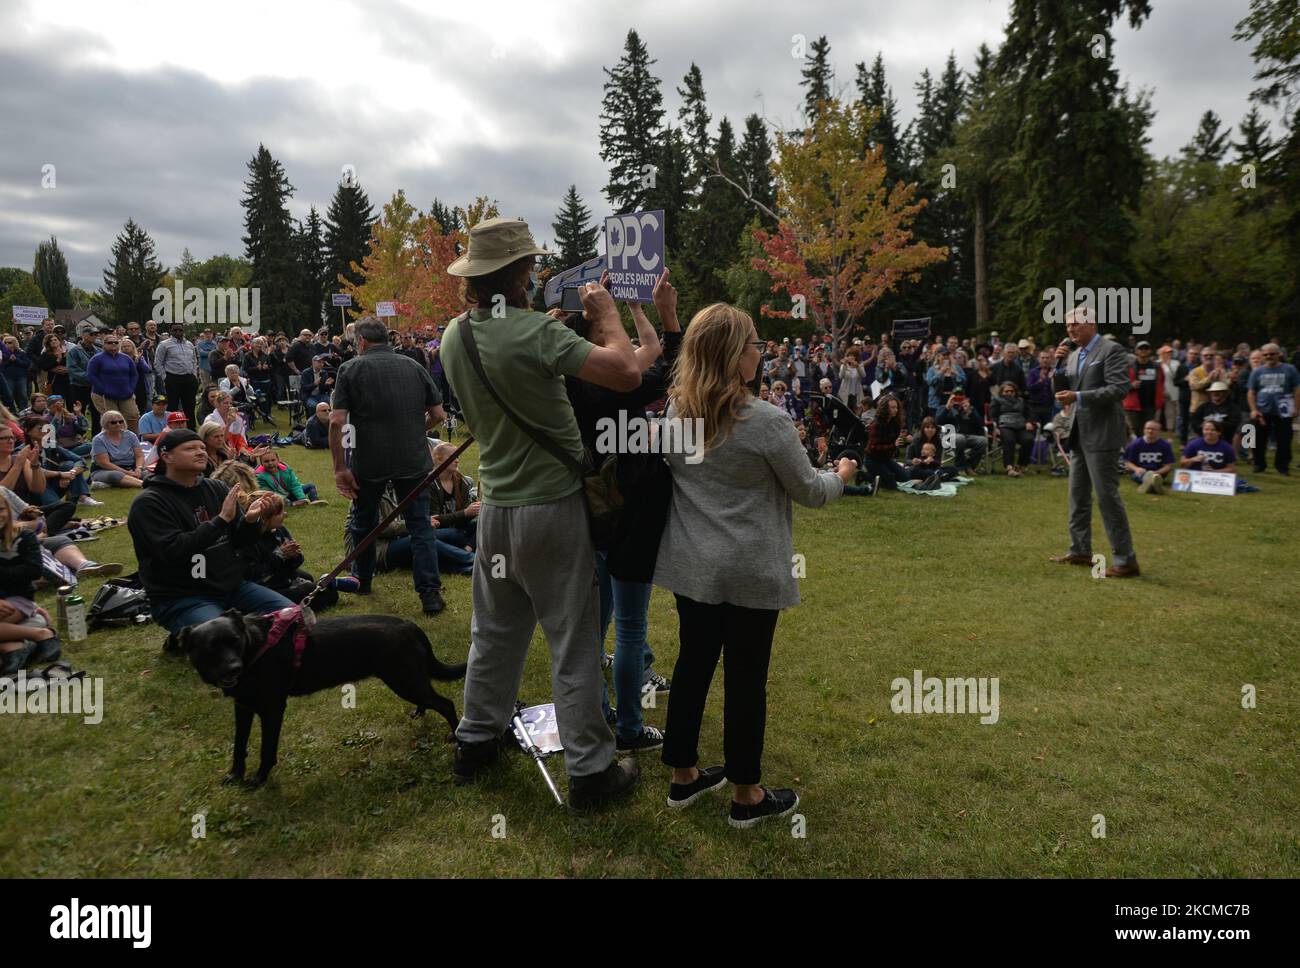 Local supporters of the People's Party of Canada seen in front of a counter-protester who is filming with his mobile phone during Maxime Bernier's address at an election rally in Borden Park, Edmonton, AB. On Saturday, 11 September 2021, in Edmonton, Alberta, Canada. (Photo by Artur Widak/NurPhoto) Stock Photo